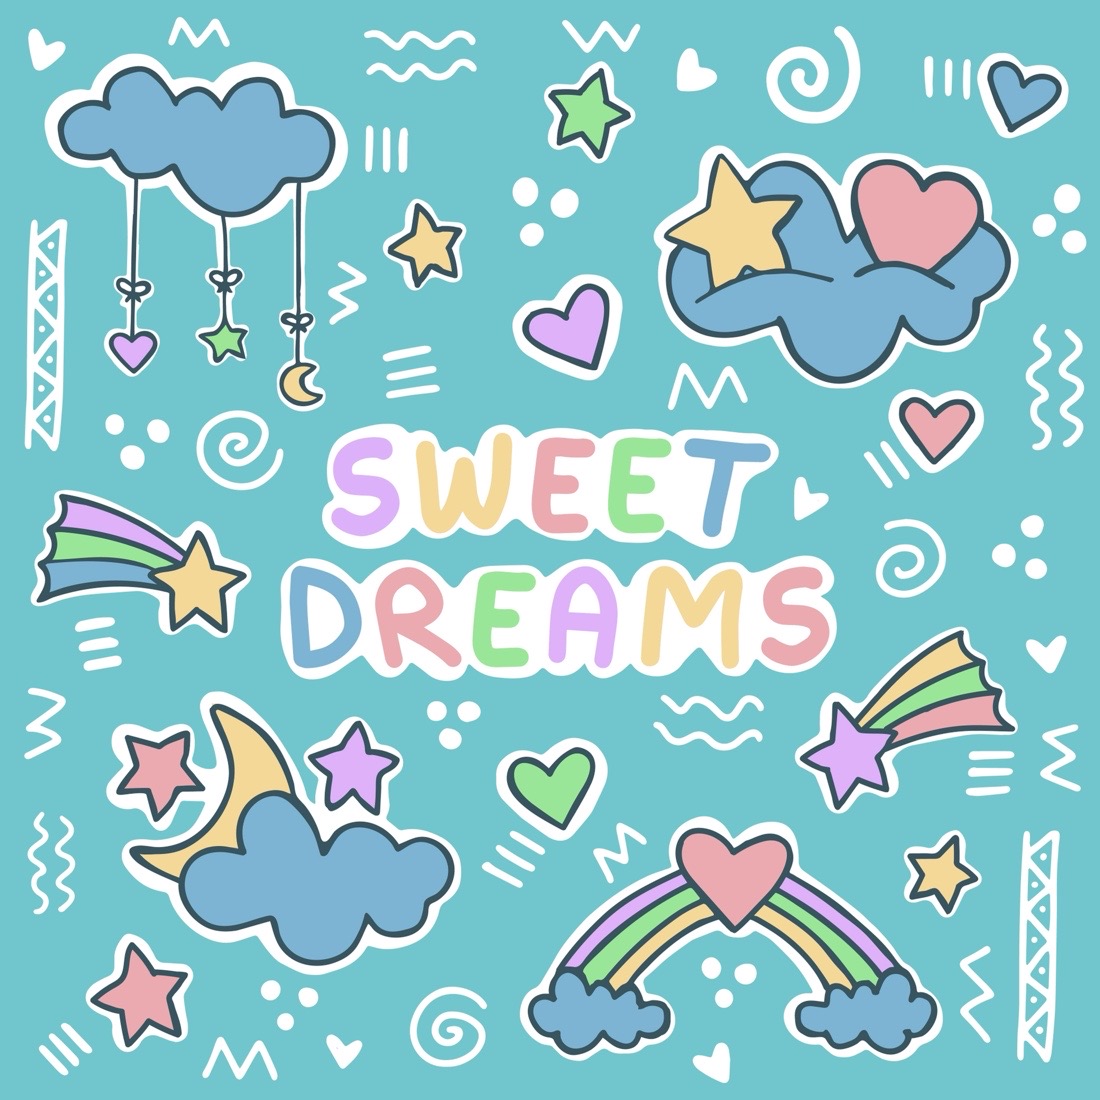 Sweet Dreams Baby Stickers and Posters cover image.